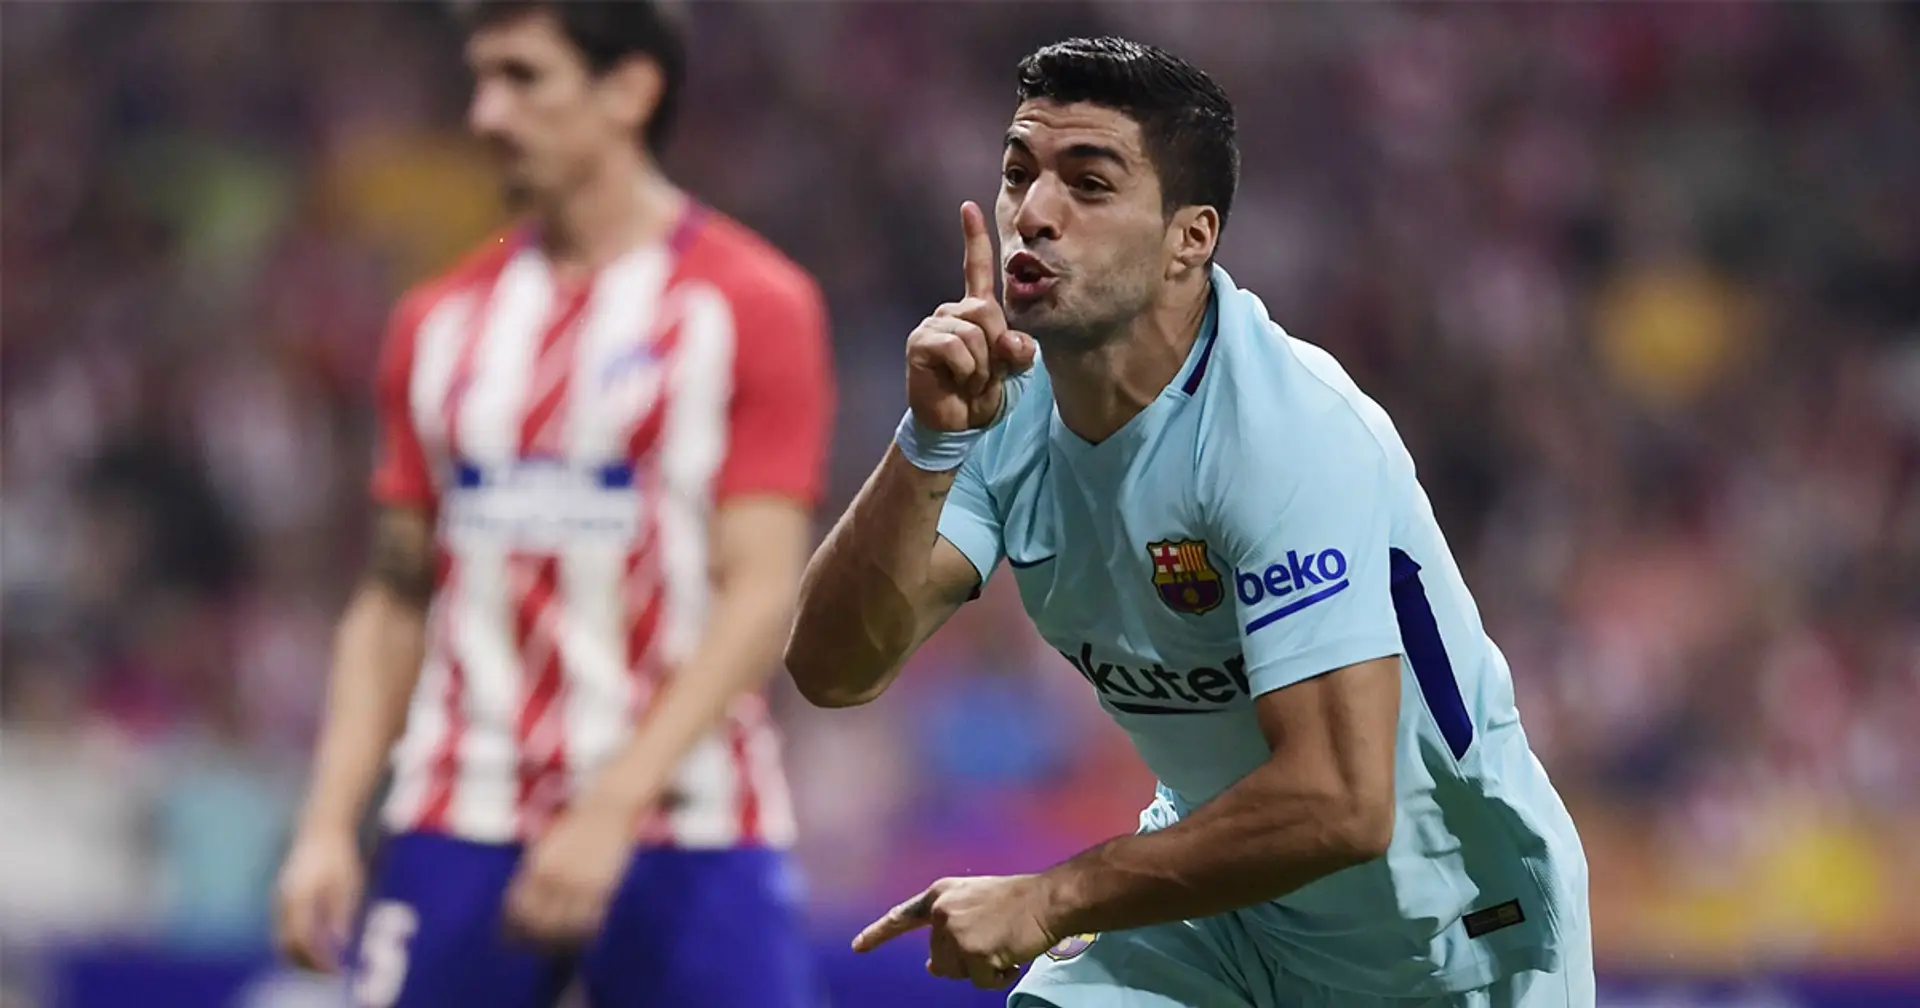 'Best No. 9 these eyes have seen since Falcao': Global Atletico community reacts to Luis Suarez's arrival